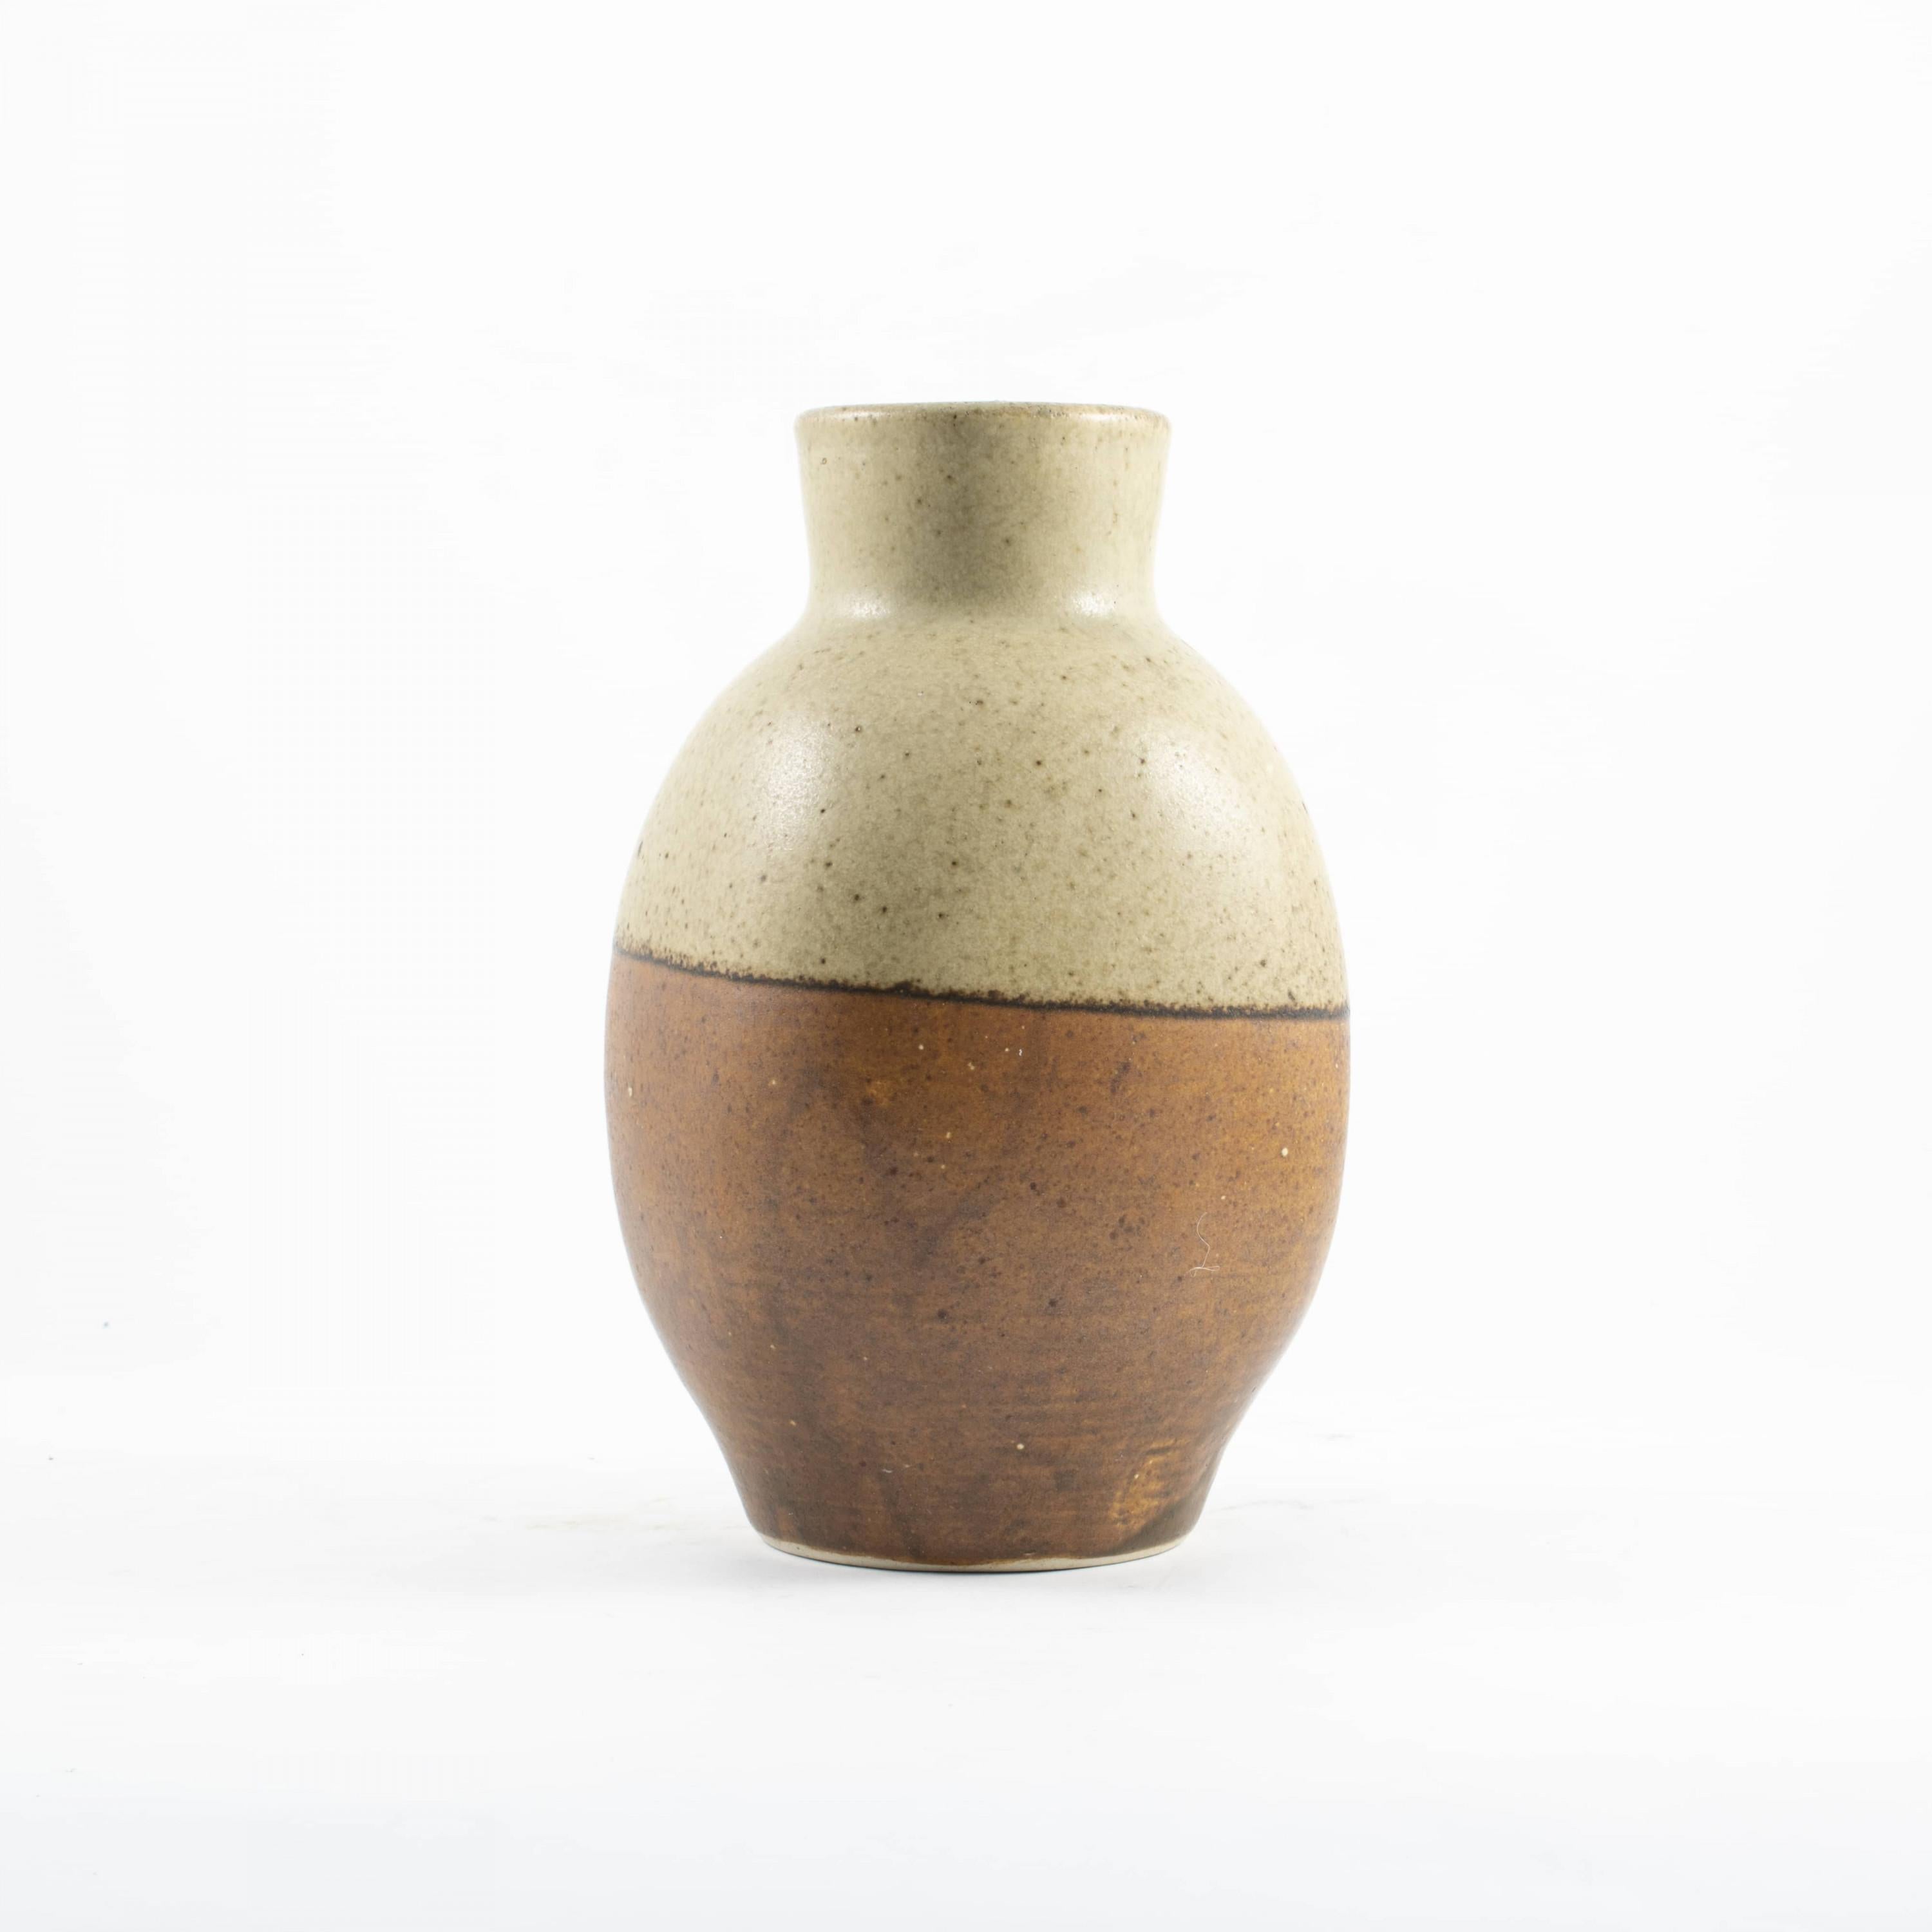 Patrick Nordstrøm (1870-1929) for Royal Copenhagen
Stoneware vase with a two-tone glaze in light brown and light grey.

Signed with monogram and Royal Copenhagen stamp. No 9-3, 1919.
 